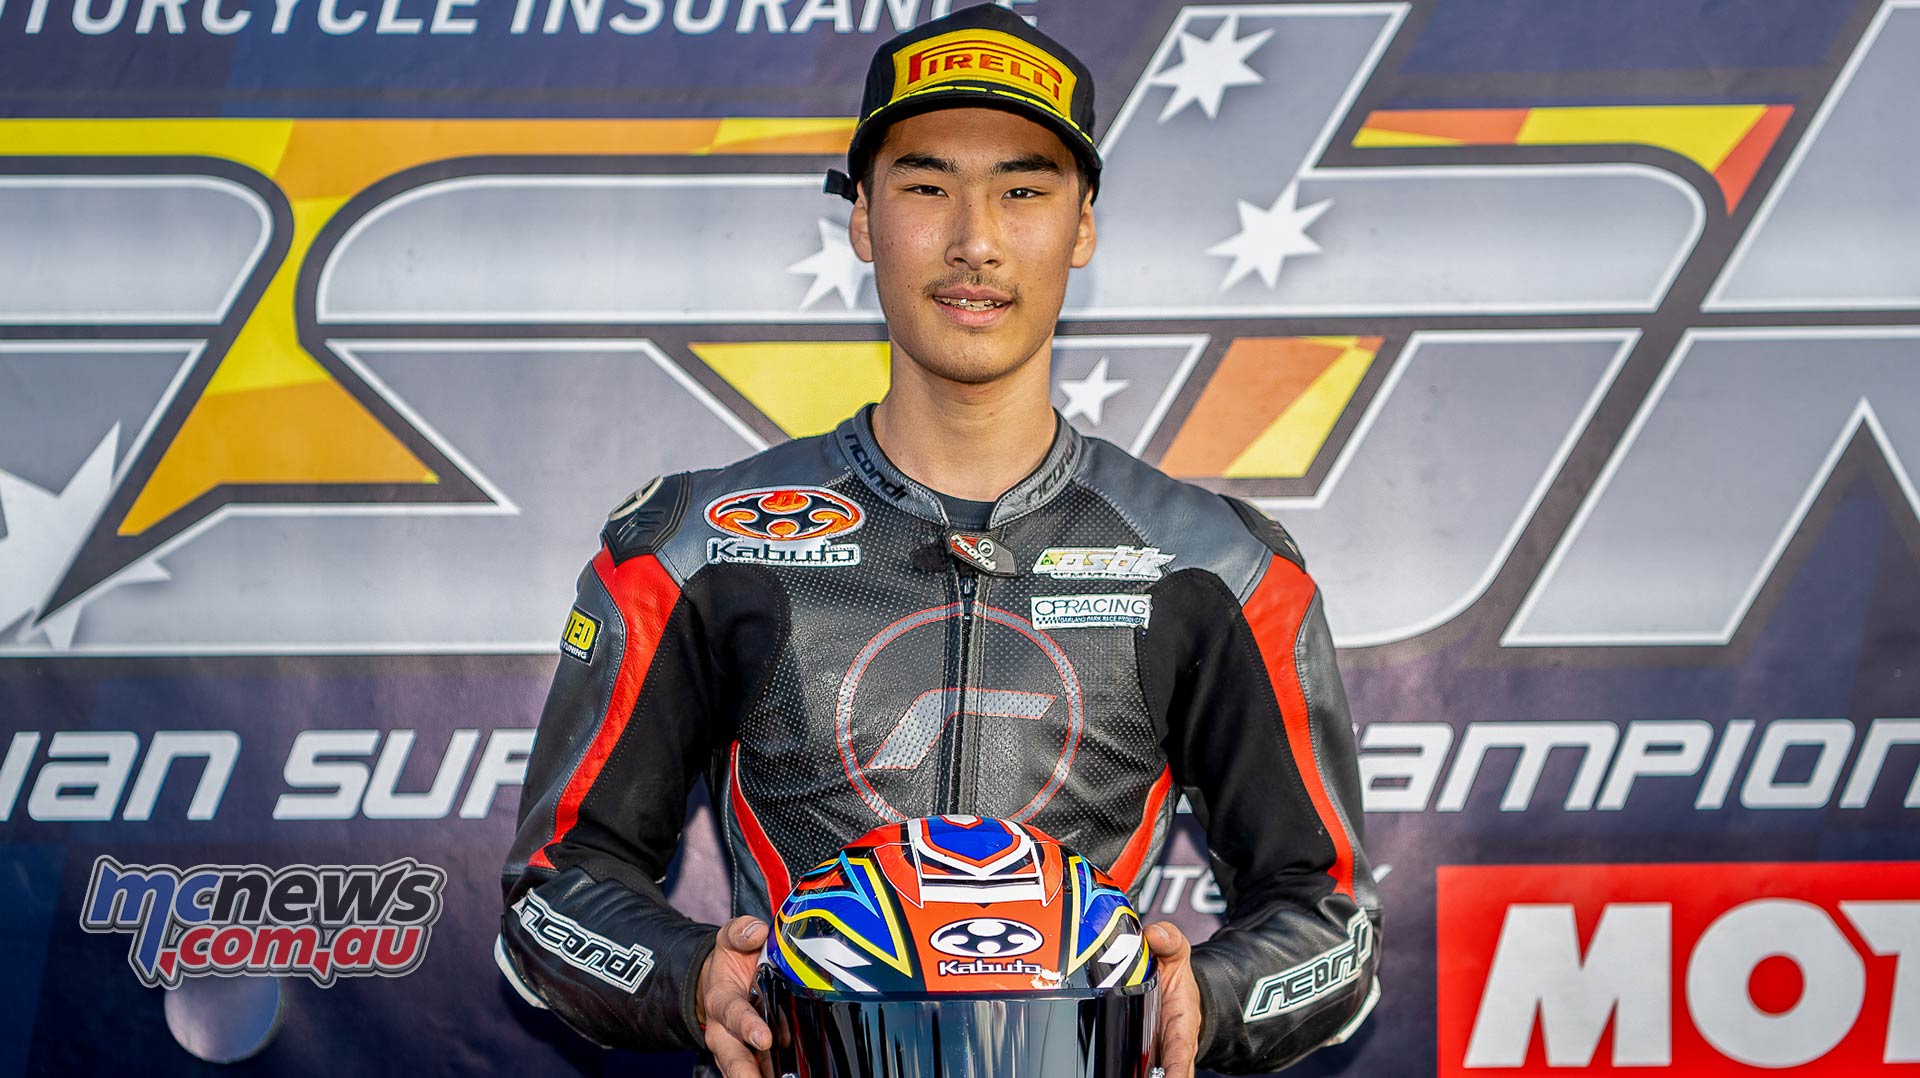 We catch up with Taiyo Aksu, a young Aussie racing in Japan | MCNews